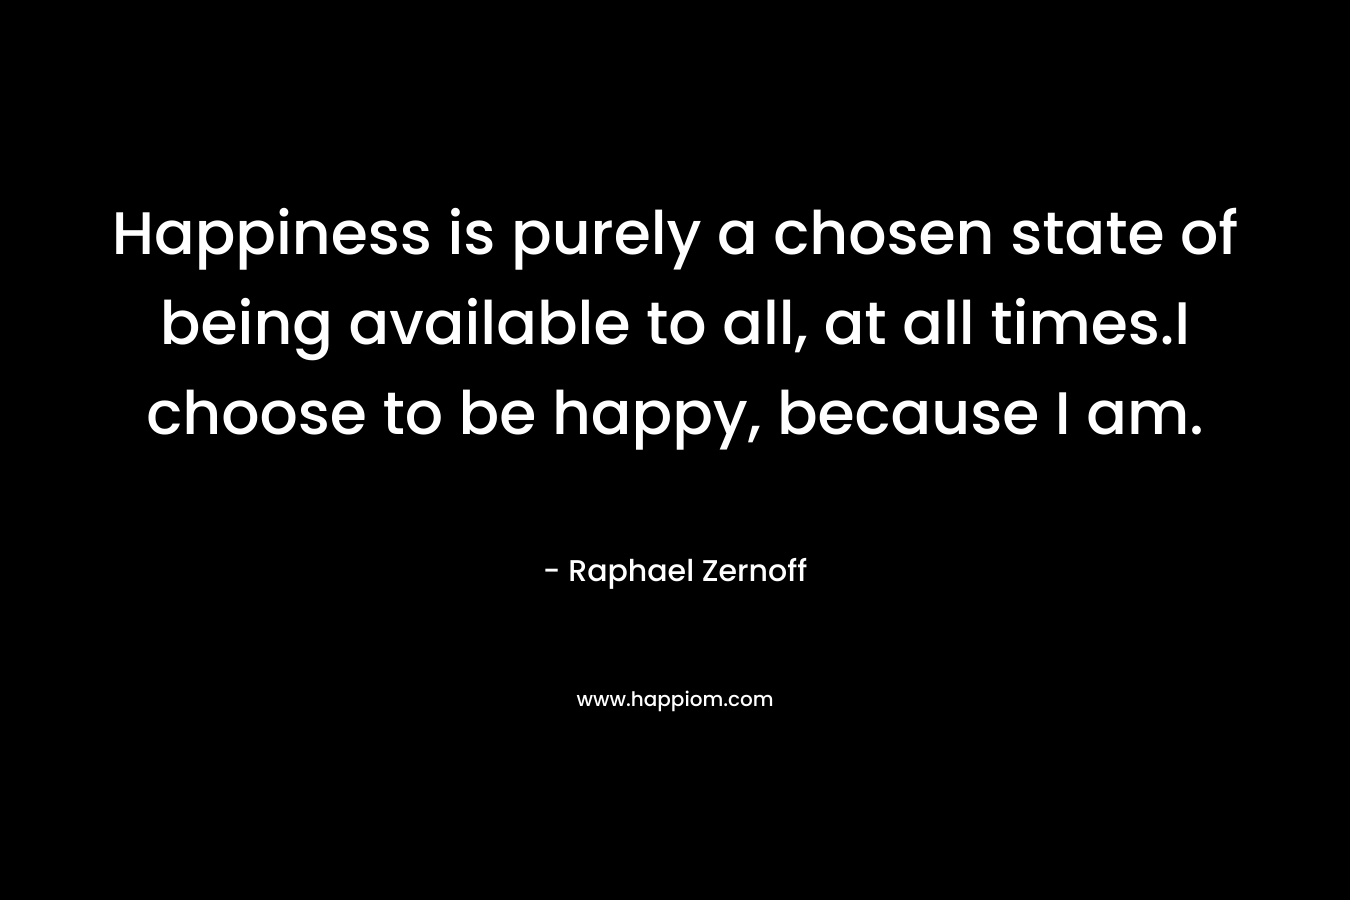 Happiness is purely a chosen state of being available to all, at all times.I choose to be happy, because I am.